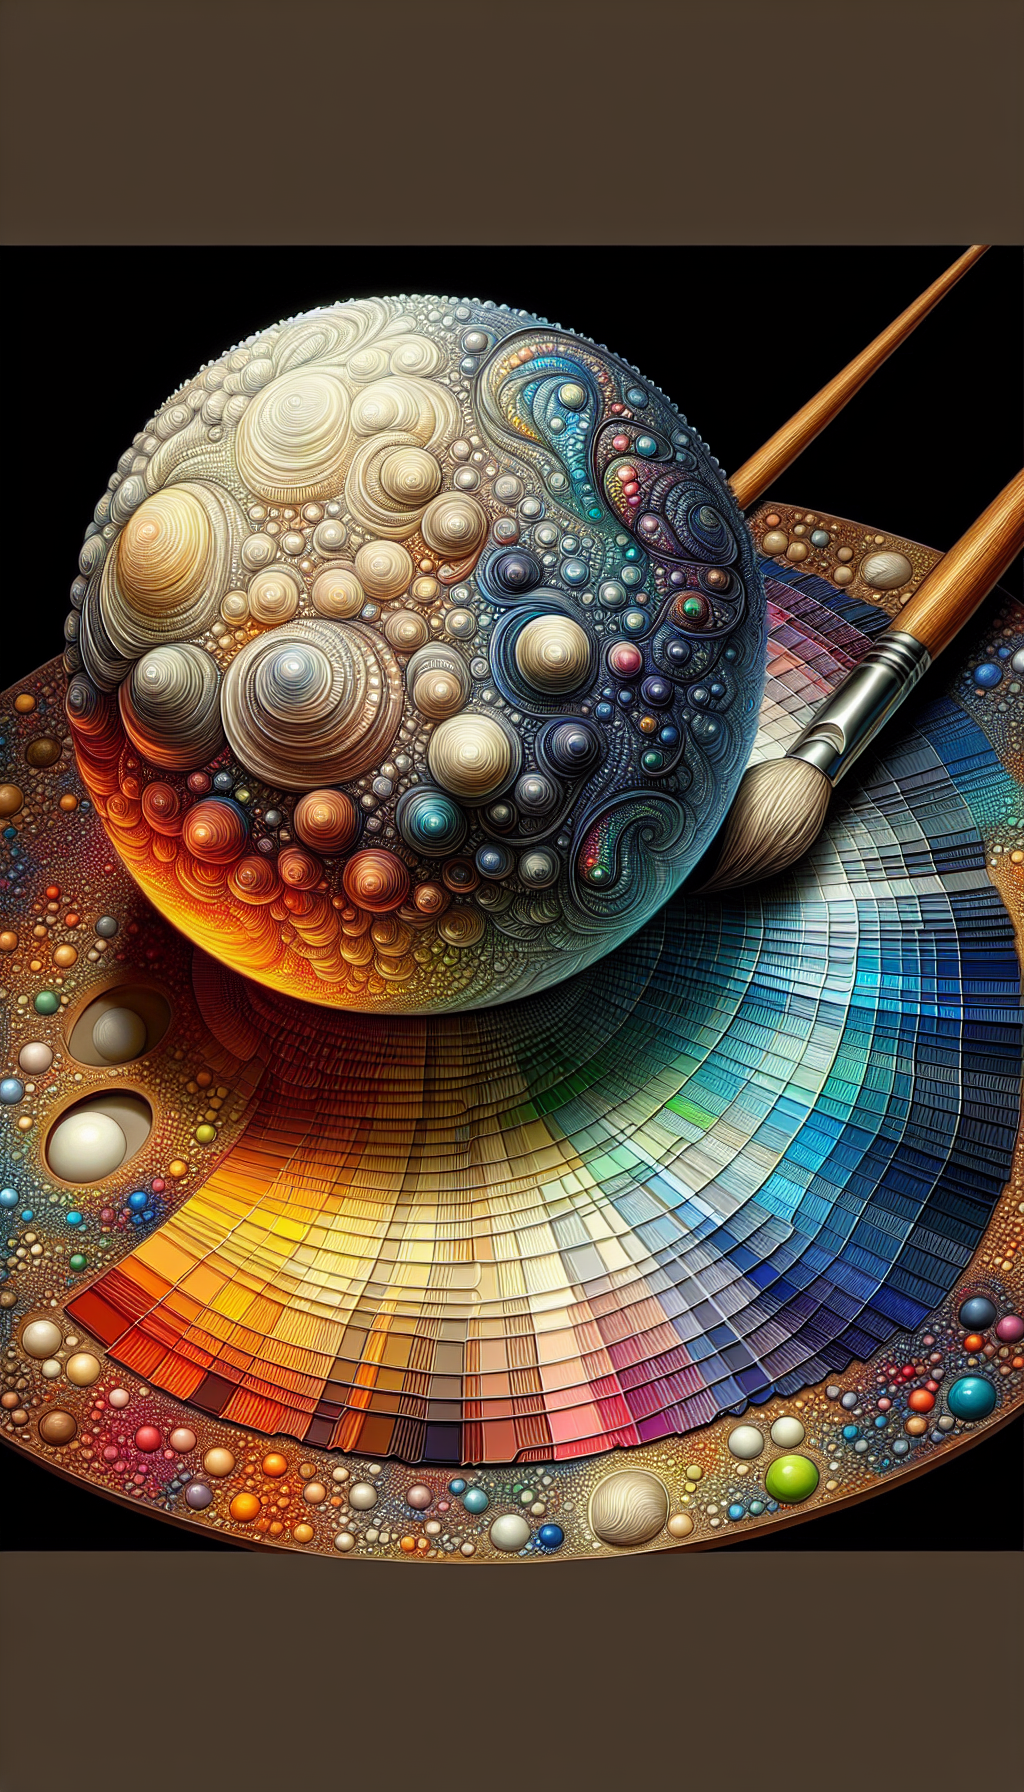 An illustration of a 3D sphere transitioning smoothly from light to dark, placed adjacent to an artist's palette where the shades blend flawlessly into each other. Each sector of the palette mirrors a point on the sphere, demonstrating the gradual increase of value and the creation of depth, symbolizing artistic mastery over the value element in shading. Different artistic styles like photorealism, impressionism, and comic book art blend into the edges of the image.